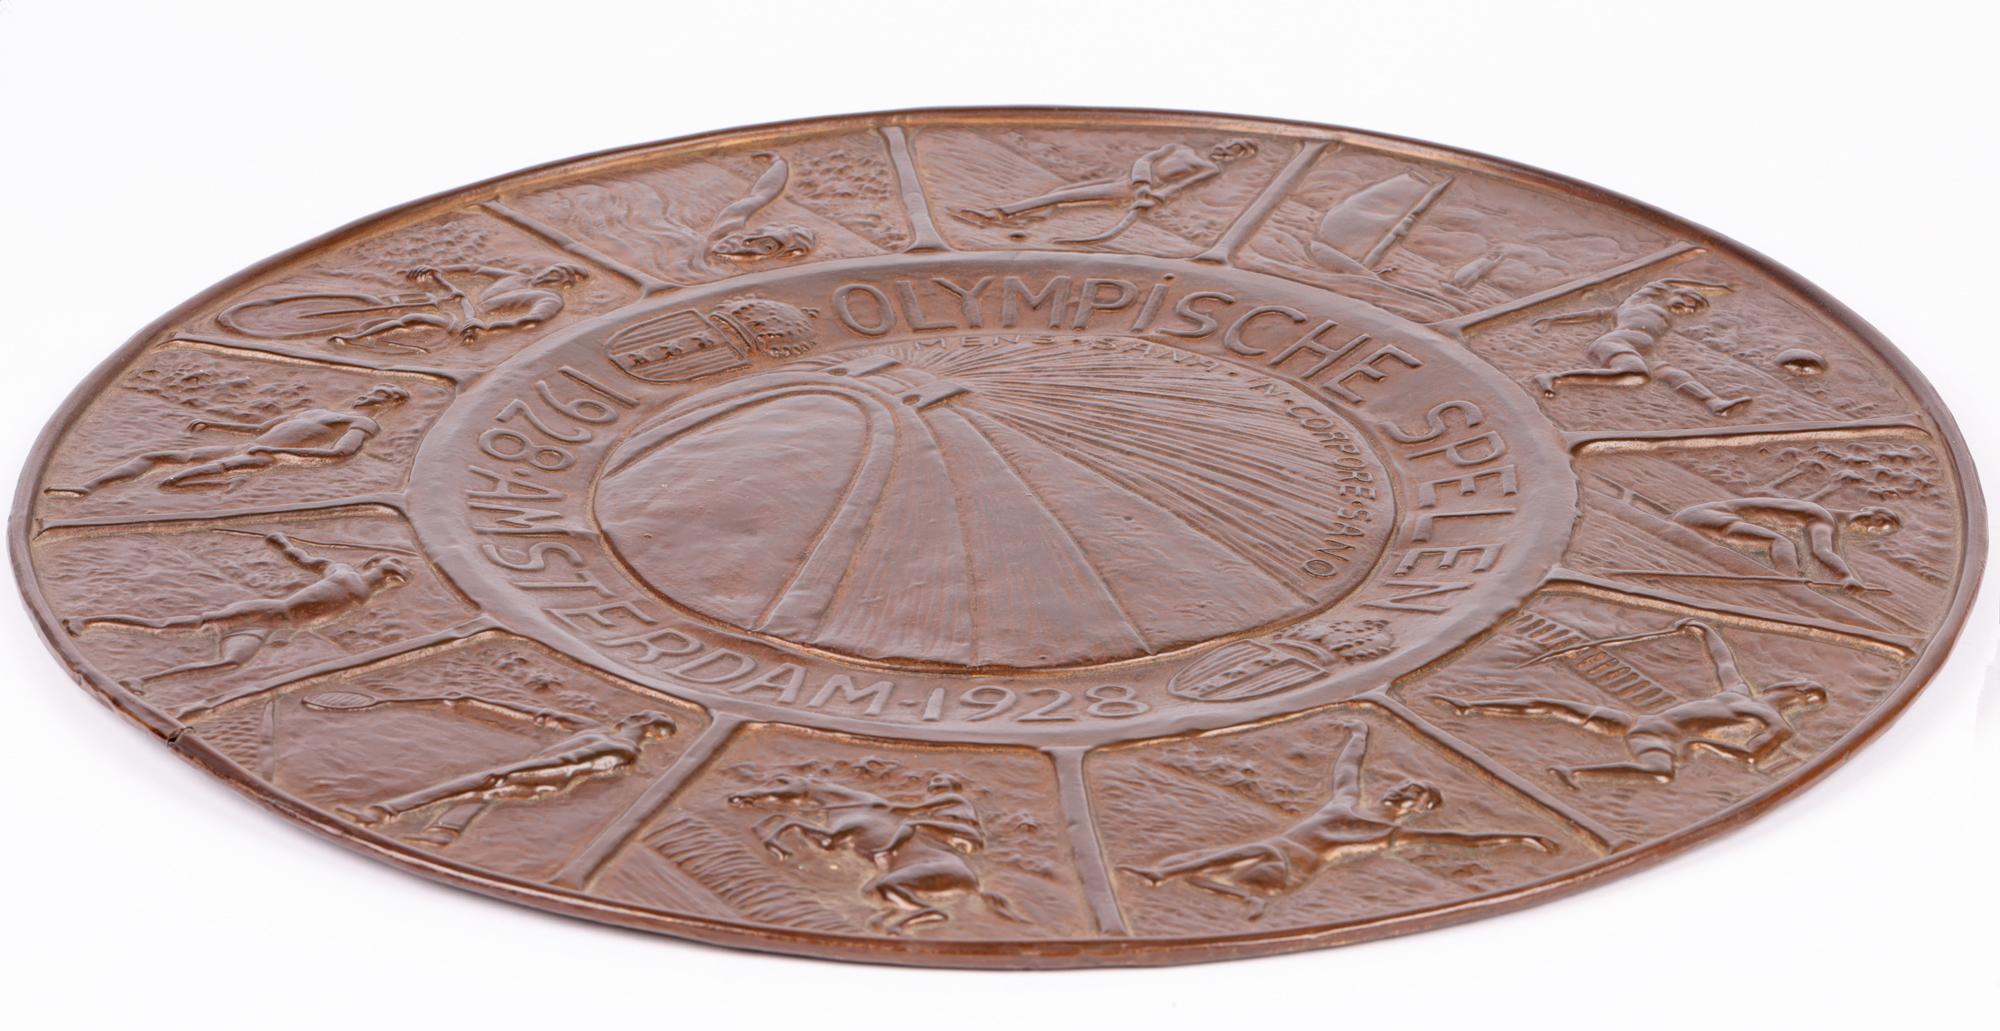 A scarce and wonderful Art Deco bronzed pressed metal wall plaque commemorating the Olympic Games held in Amsterdam in 1928. The plaque is of large round shape and made of a light pressed metal with a simple round folded rim, the surface with a